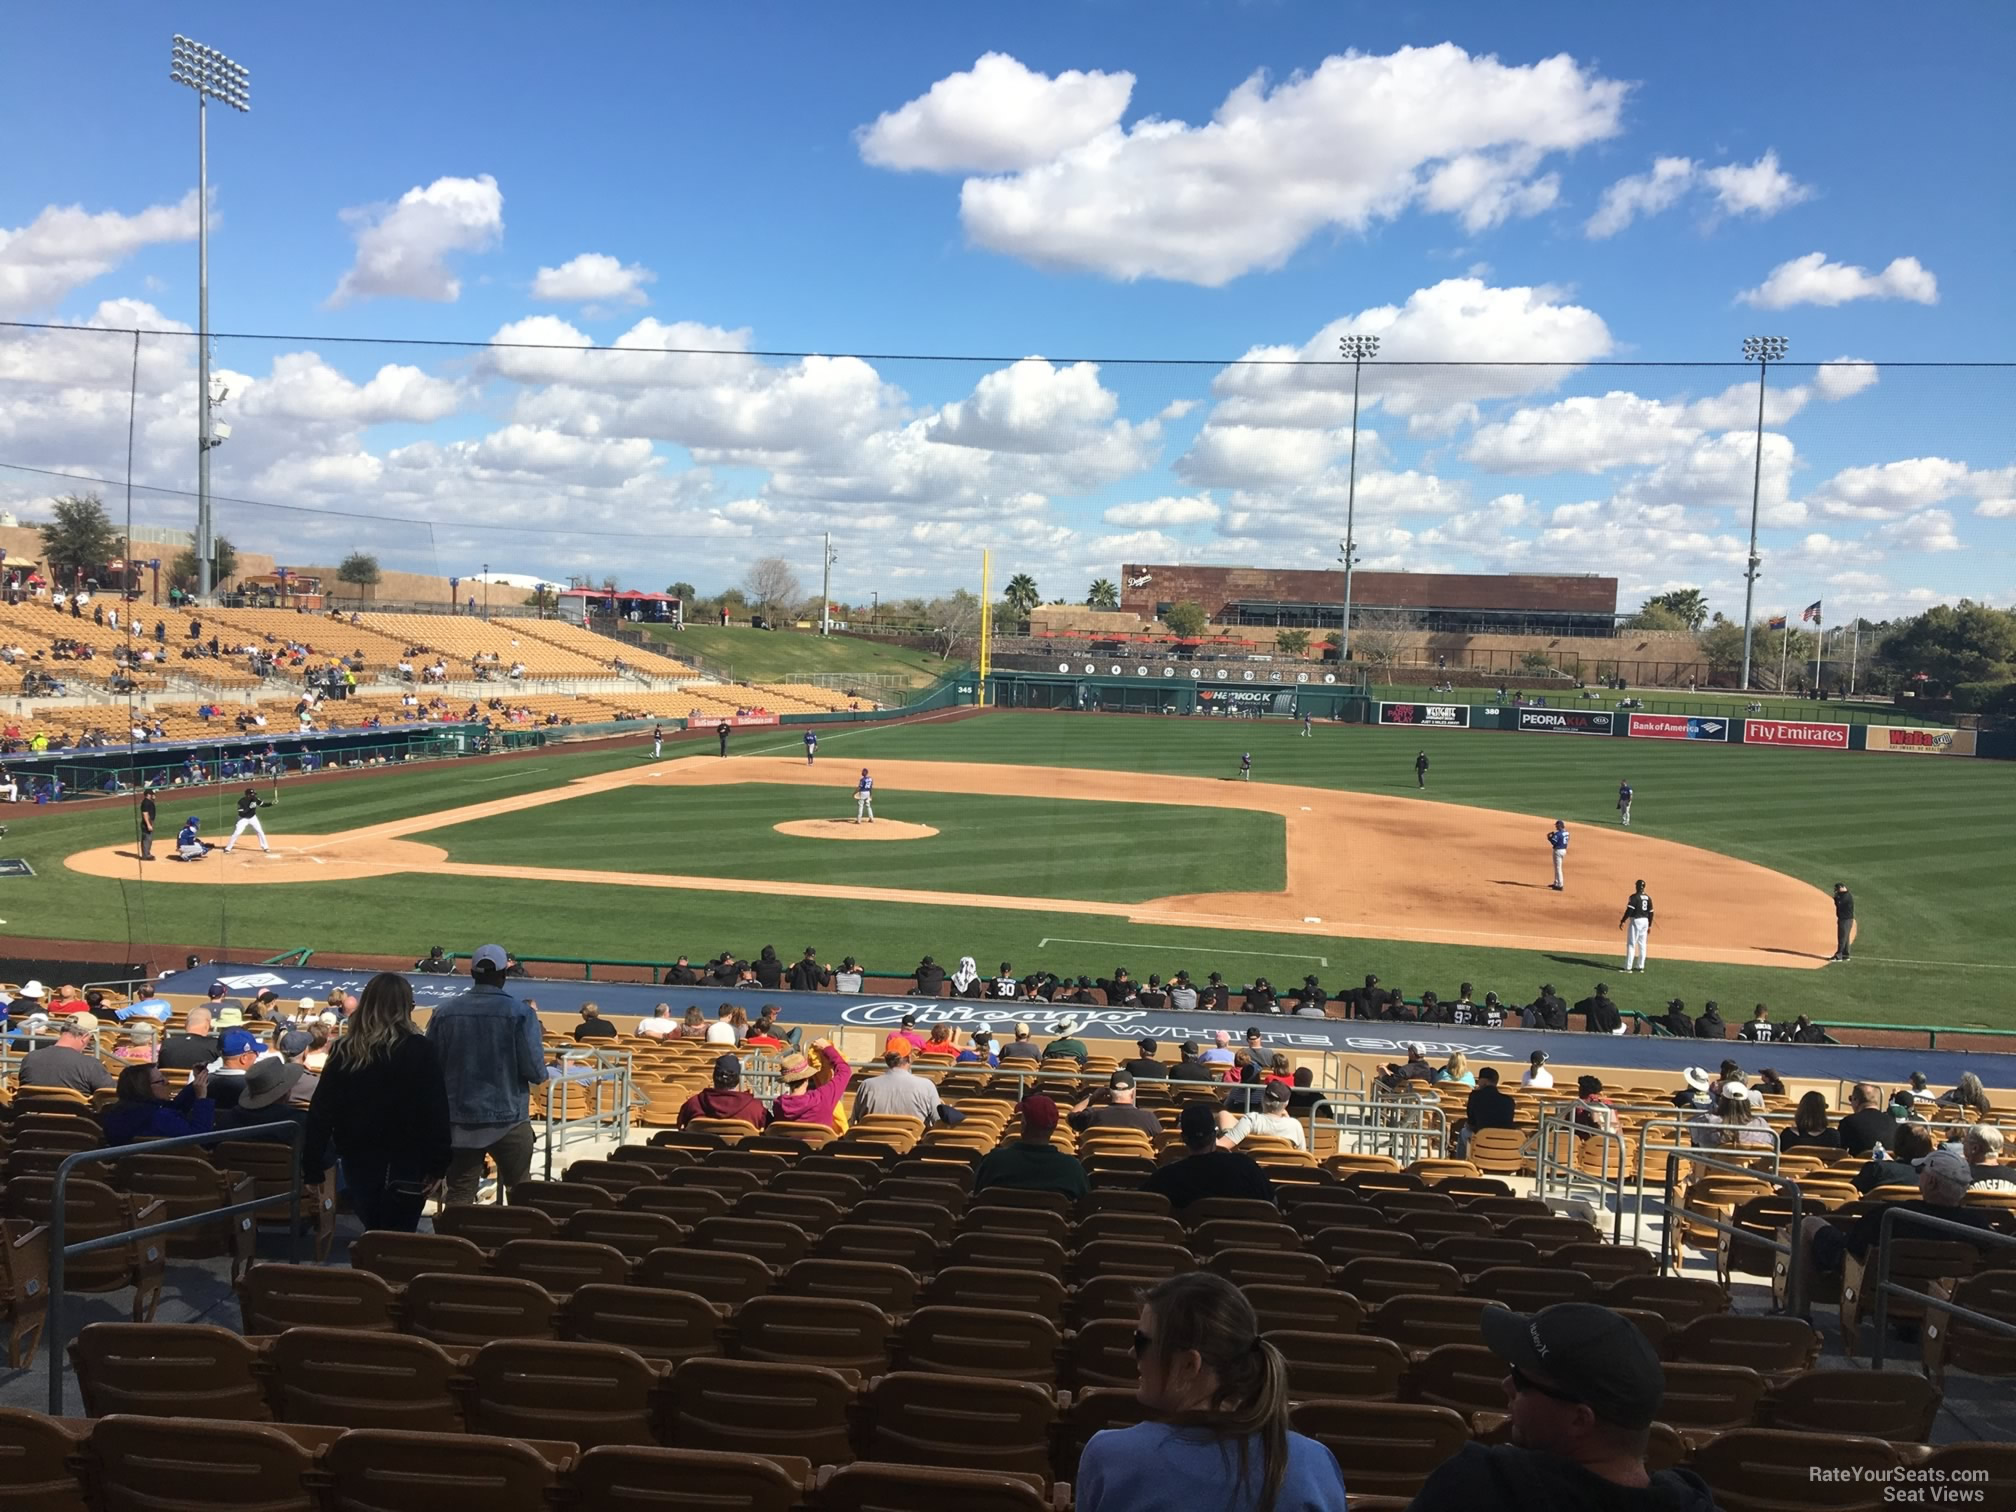 section 108, row 18 seat view  - camelback ranch